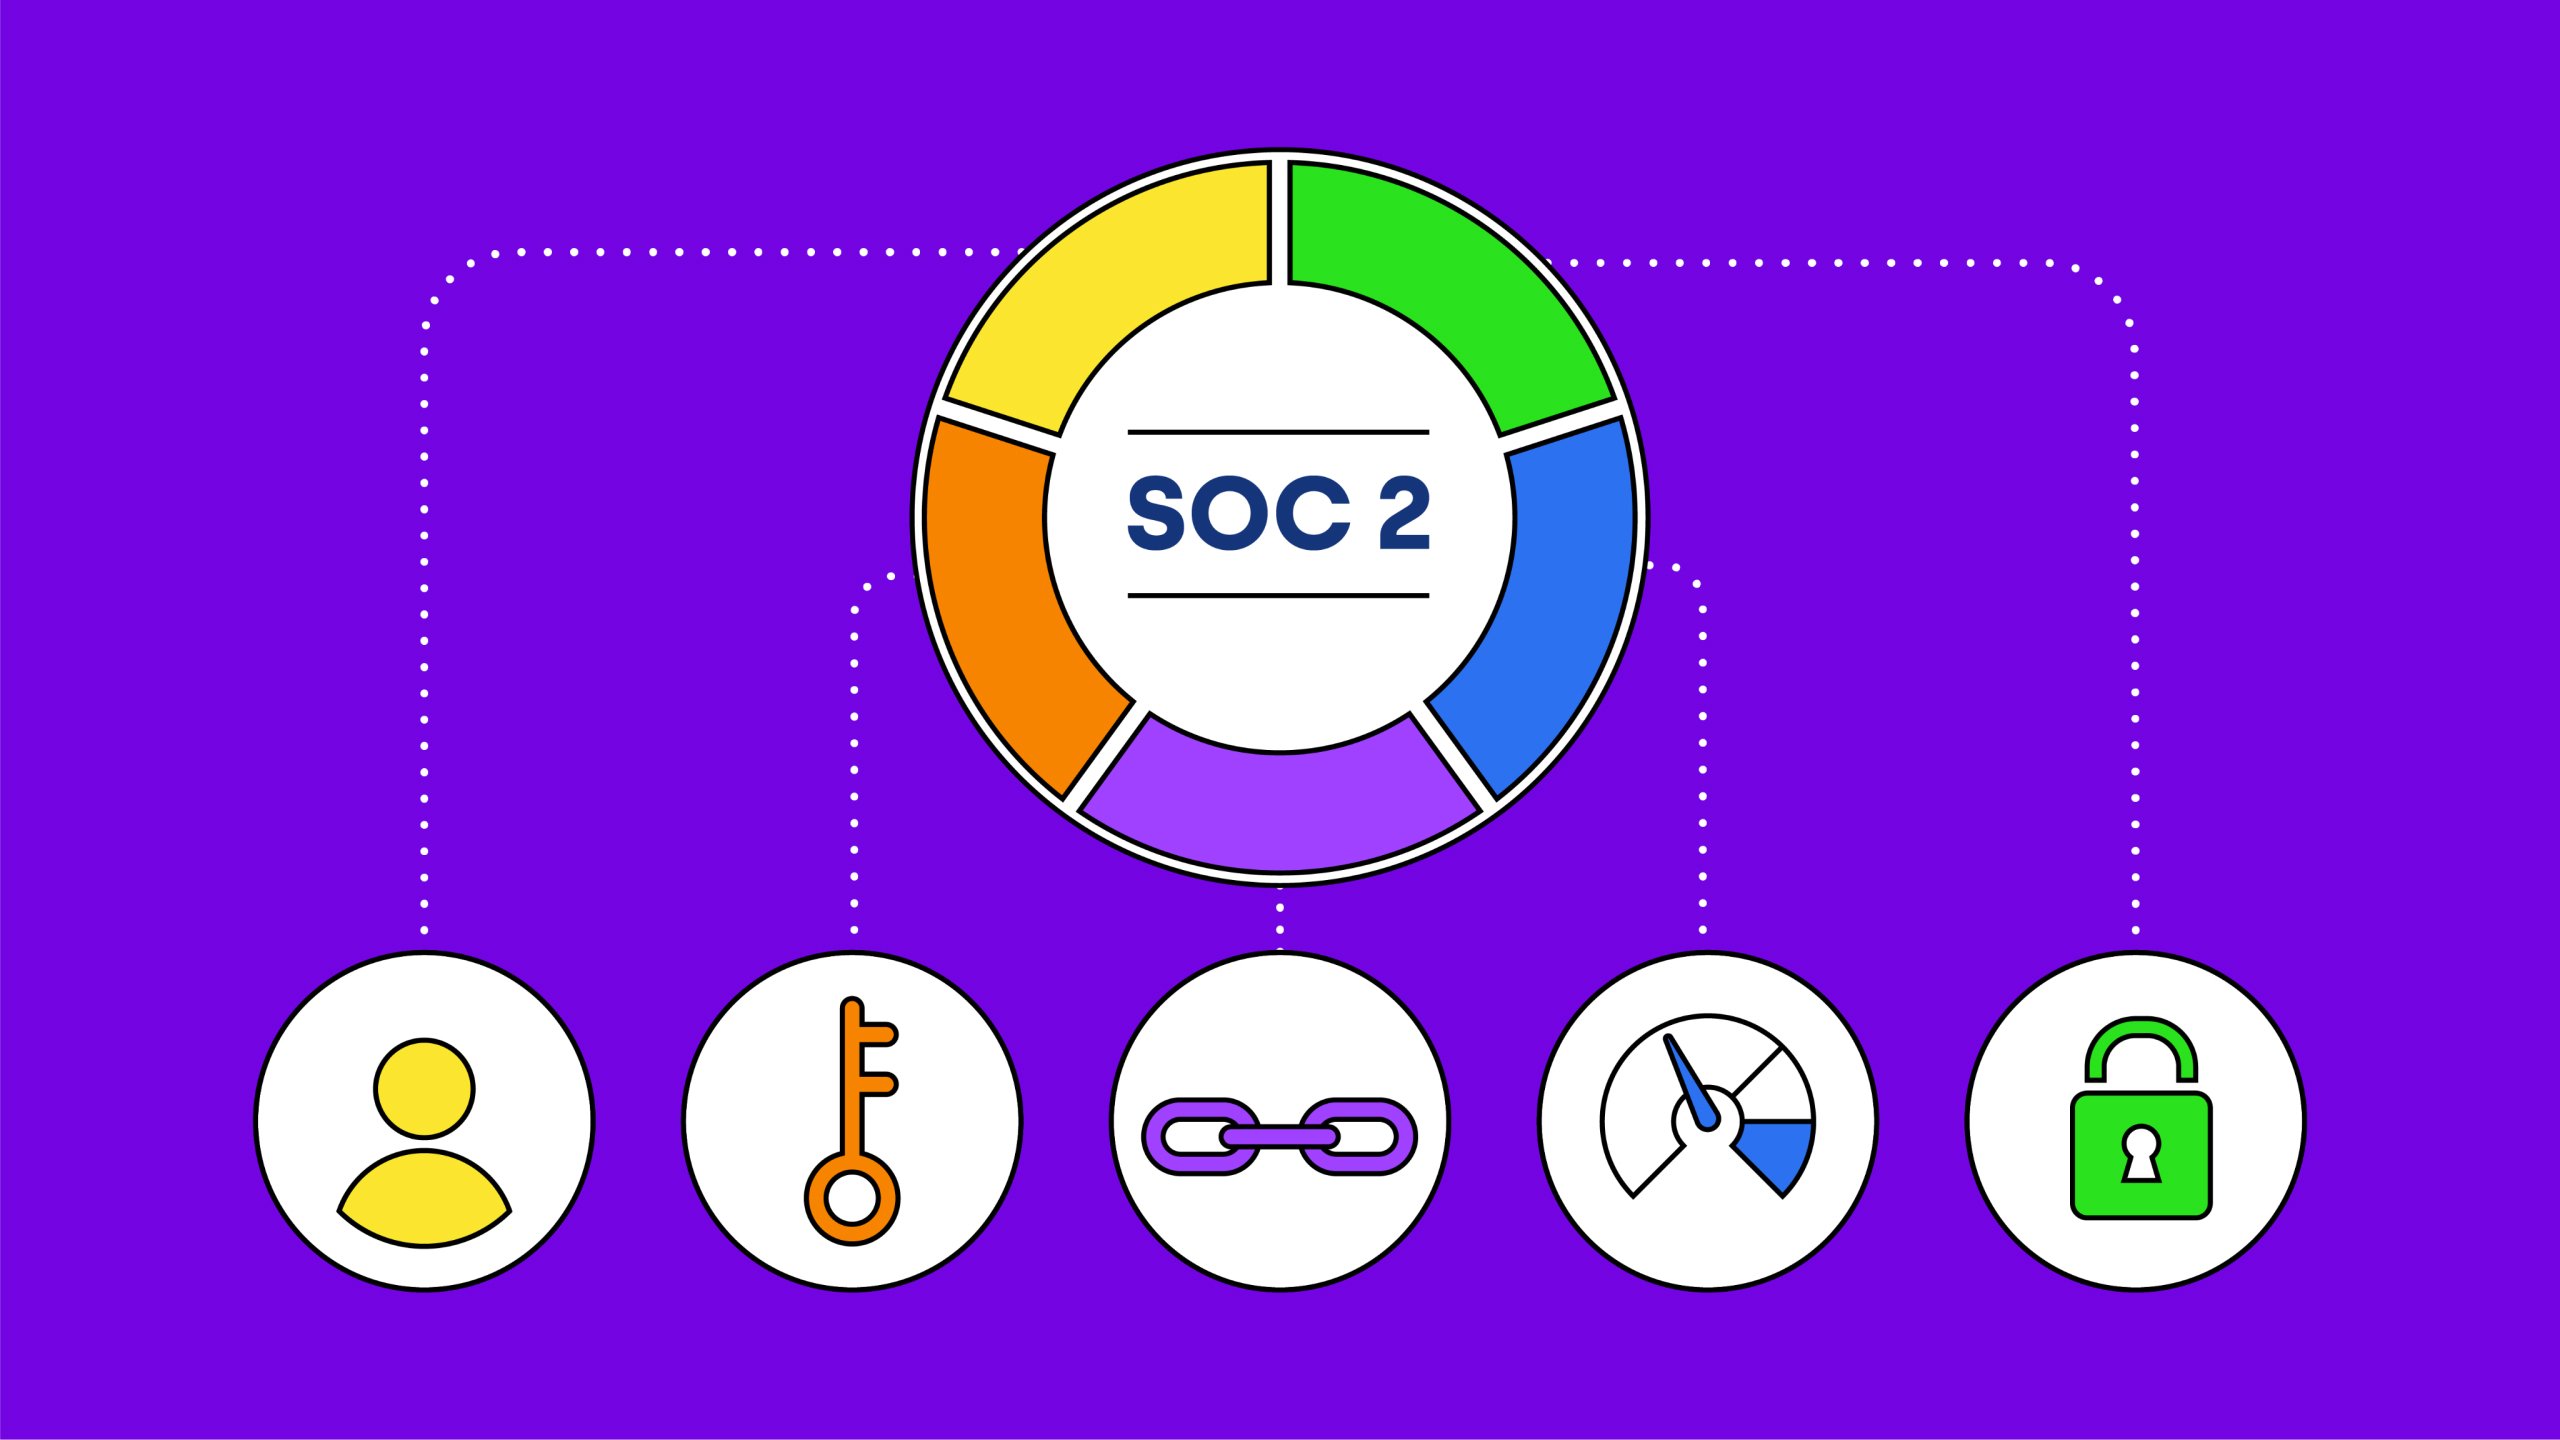 Everything you should know about our SOC 2 compliance